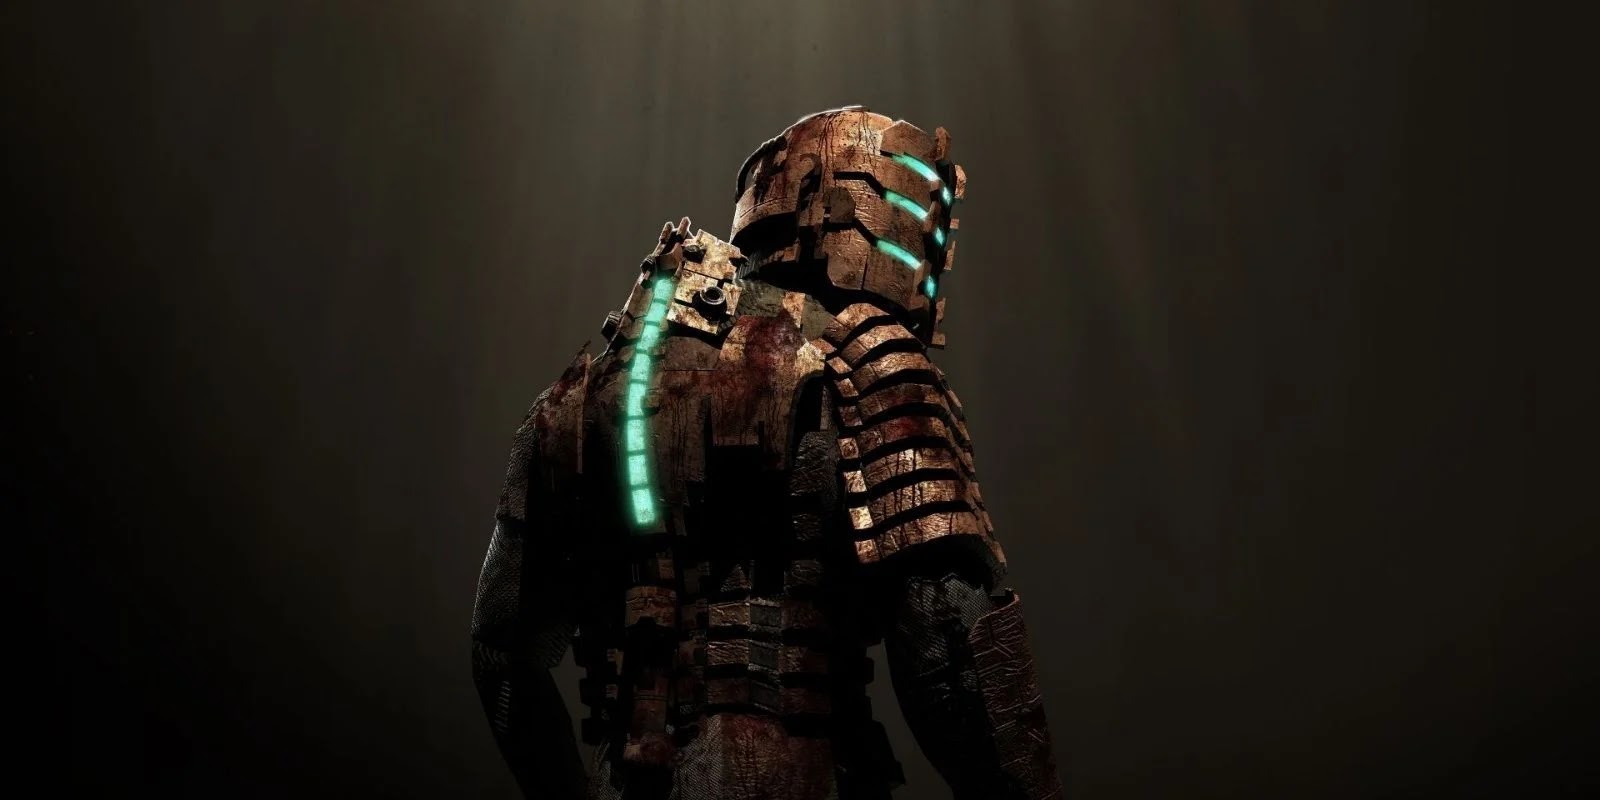 Electronic Arts Announces the Return of Dead Space, a Remake of the Sci-Fi Classic Survival Horror Game